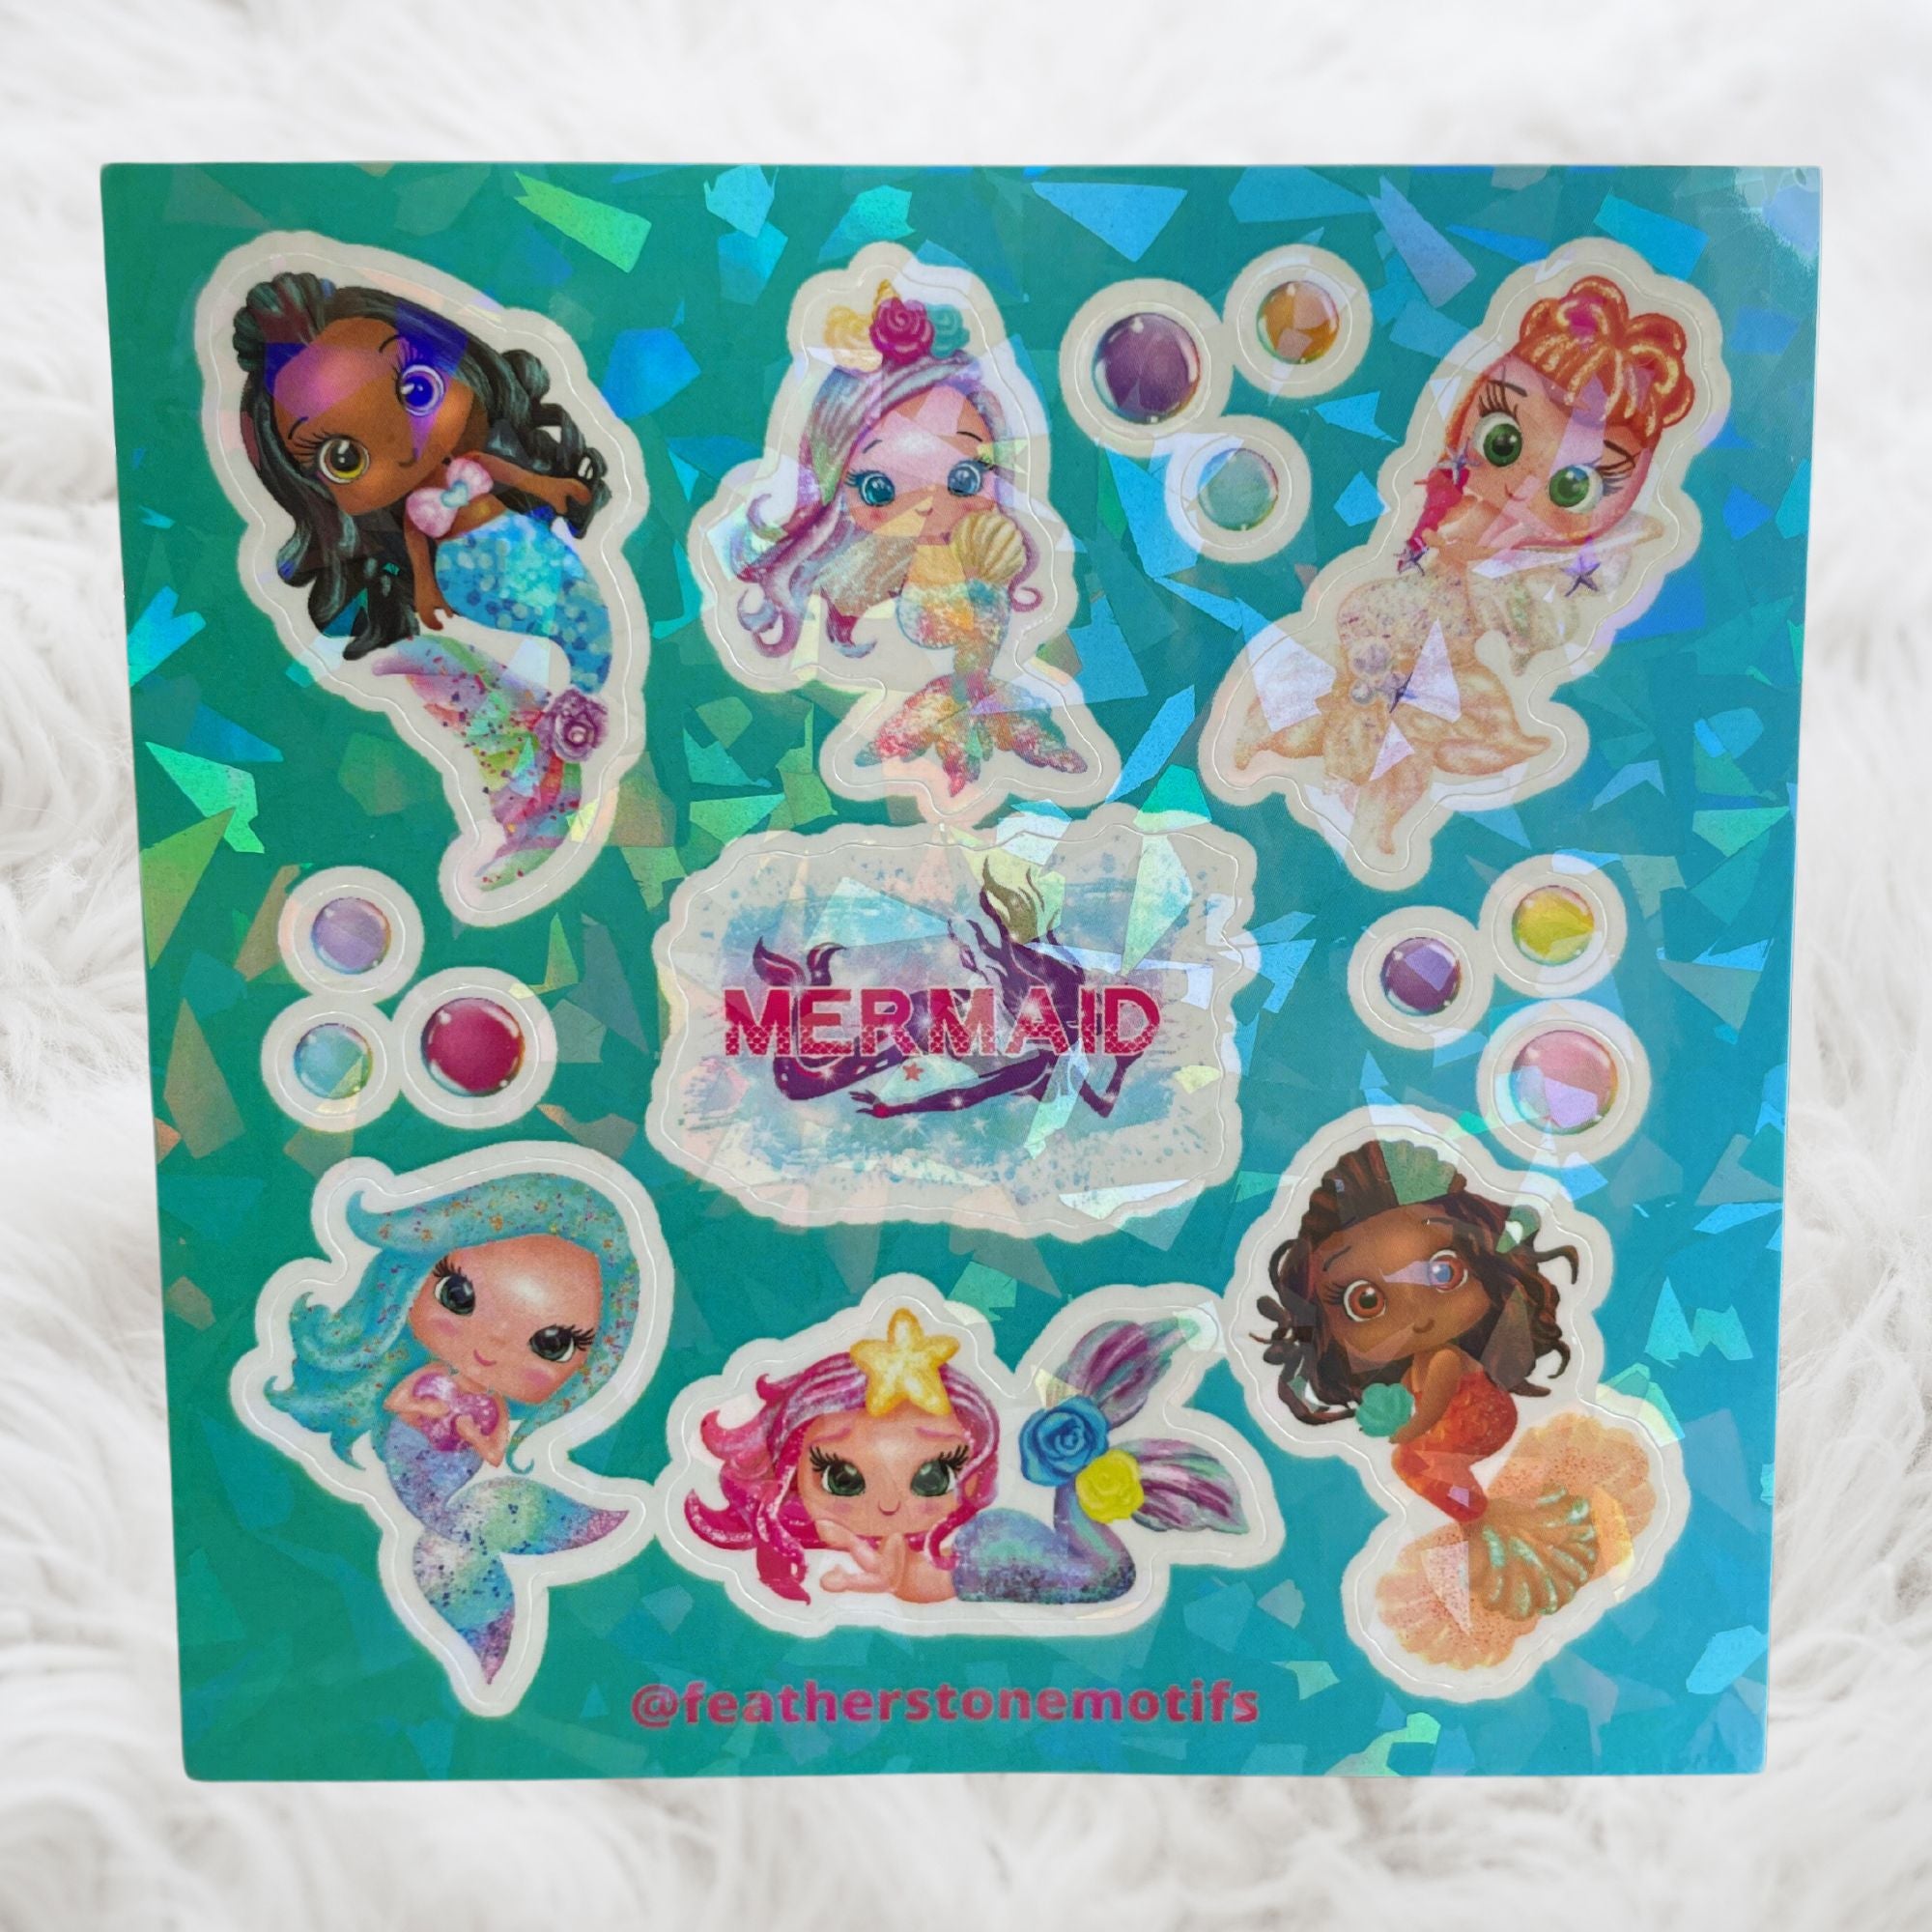 This image shows the Mermaids mini sheet with crackle overlay